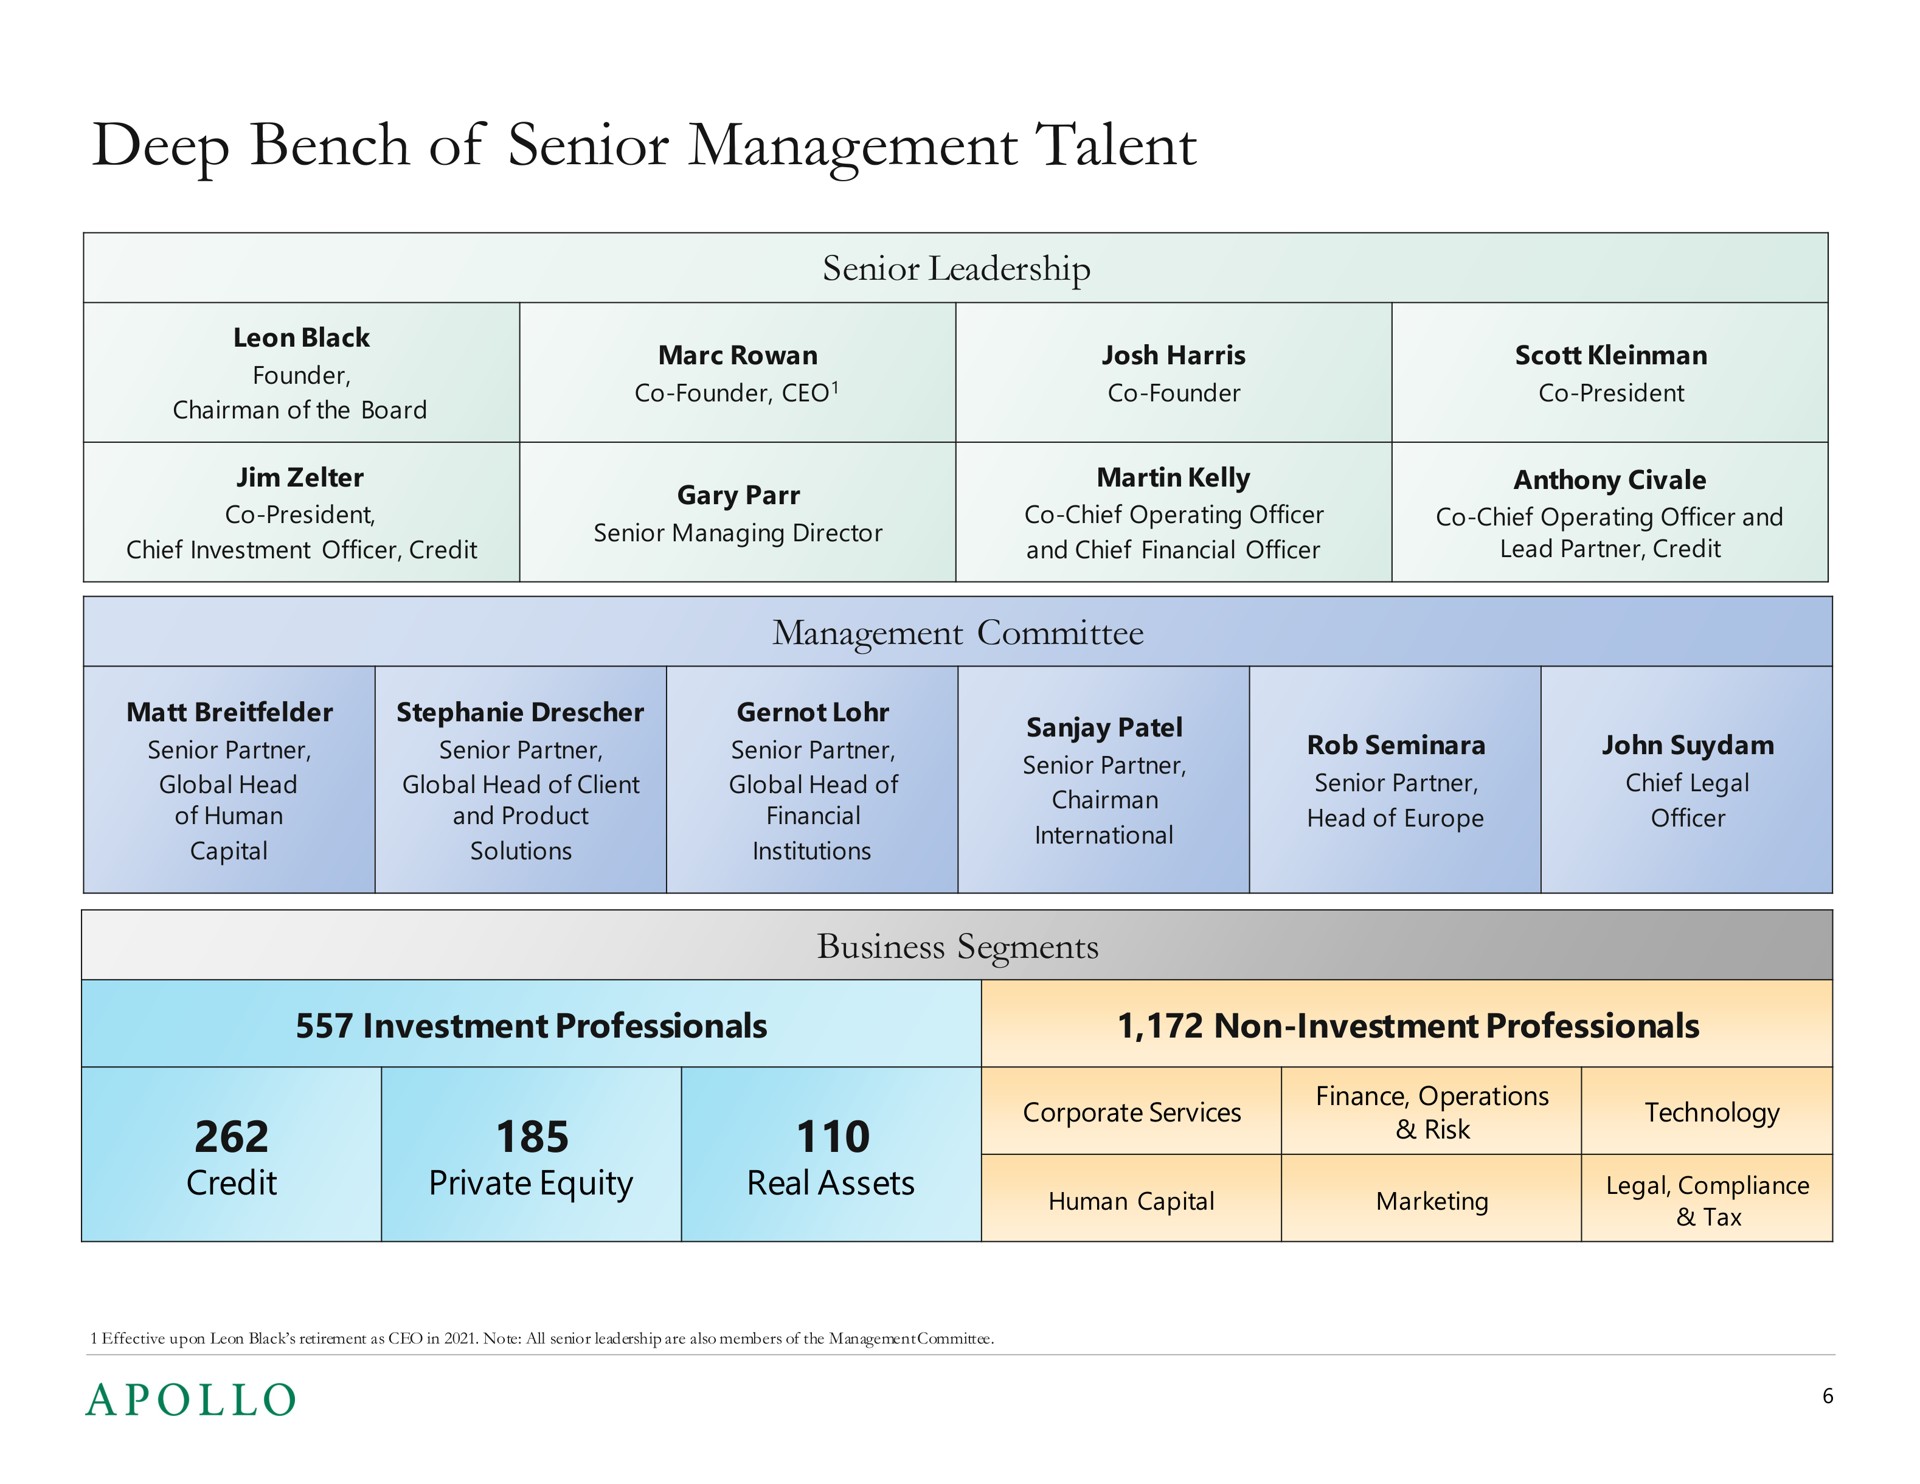 deep bench of senior management talent senior leadership management committee business segments credit private equity real assets | Apollo Global Management